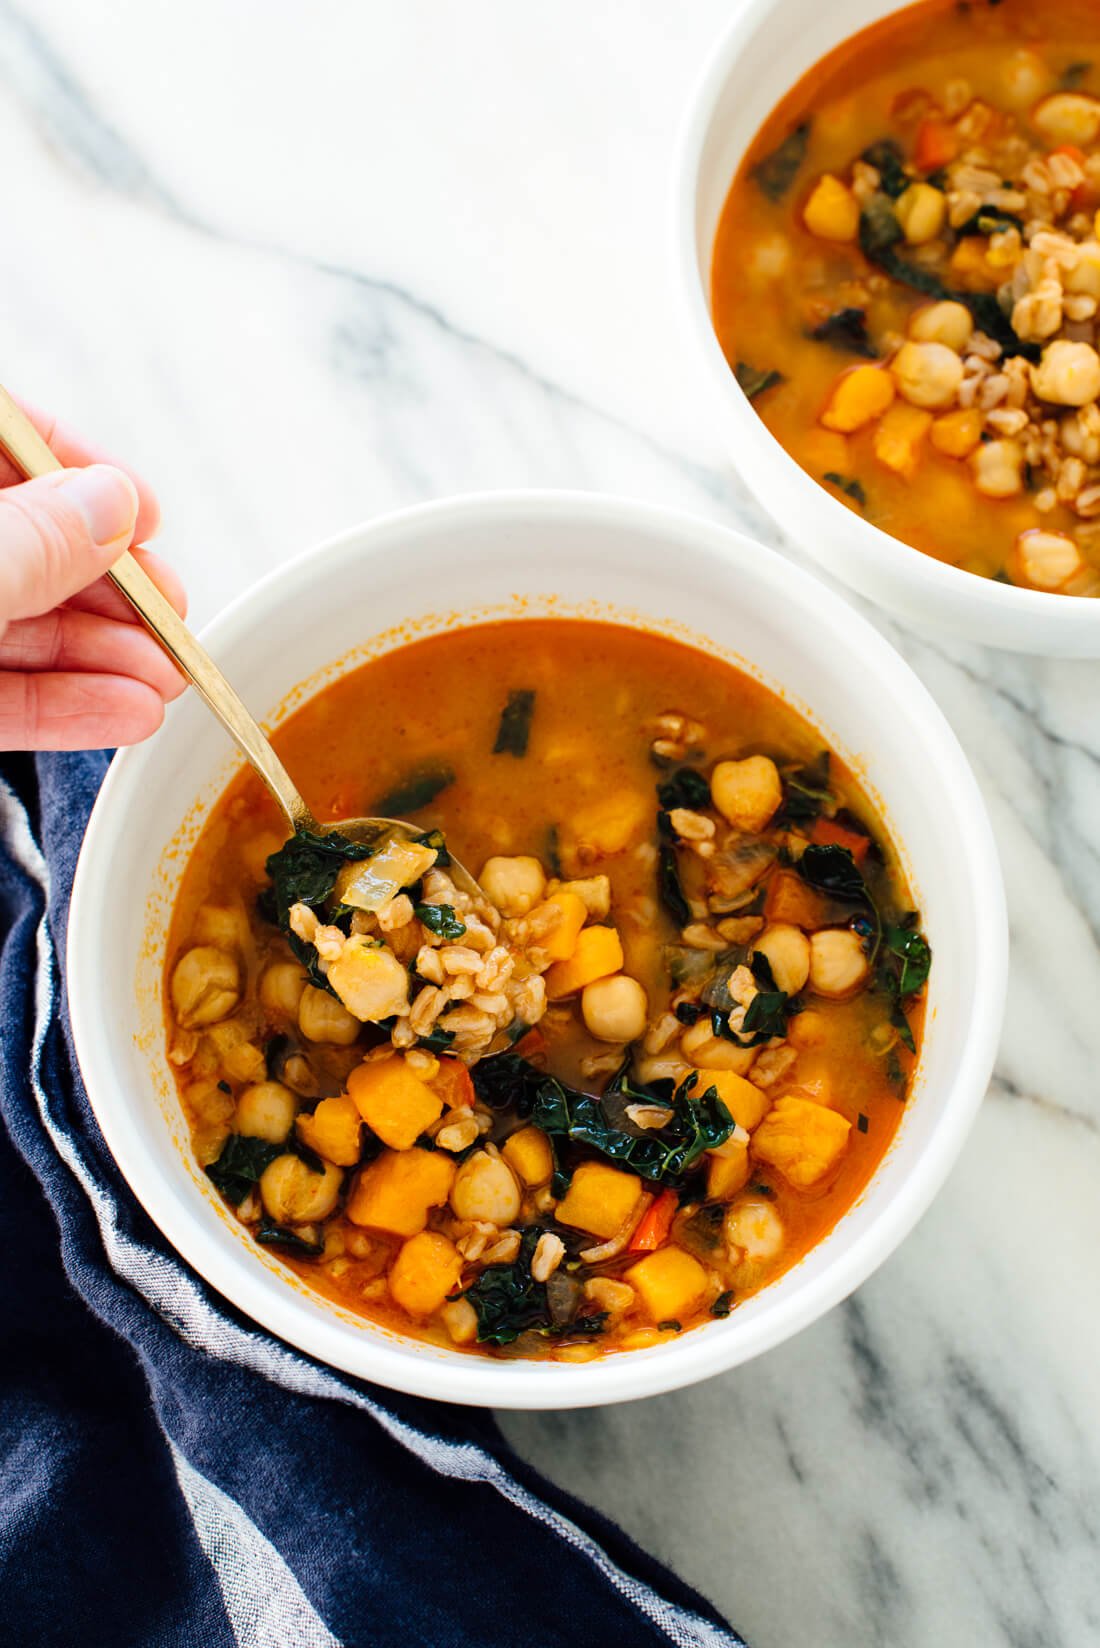 This healthy #vegan soup recipe is made with sweet potato, kale, farro and chickpeas!